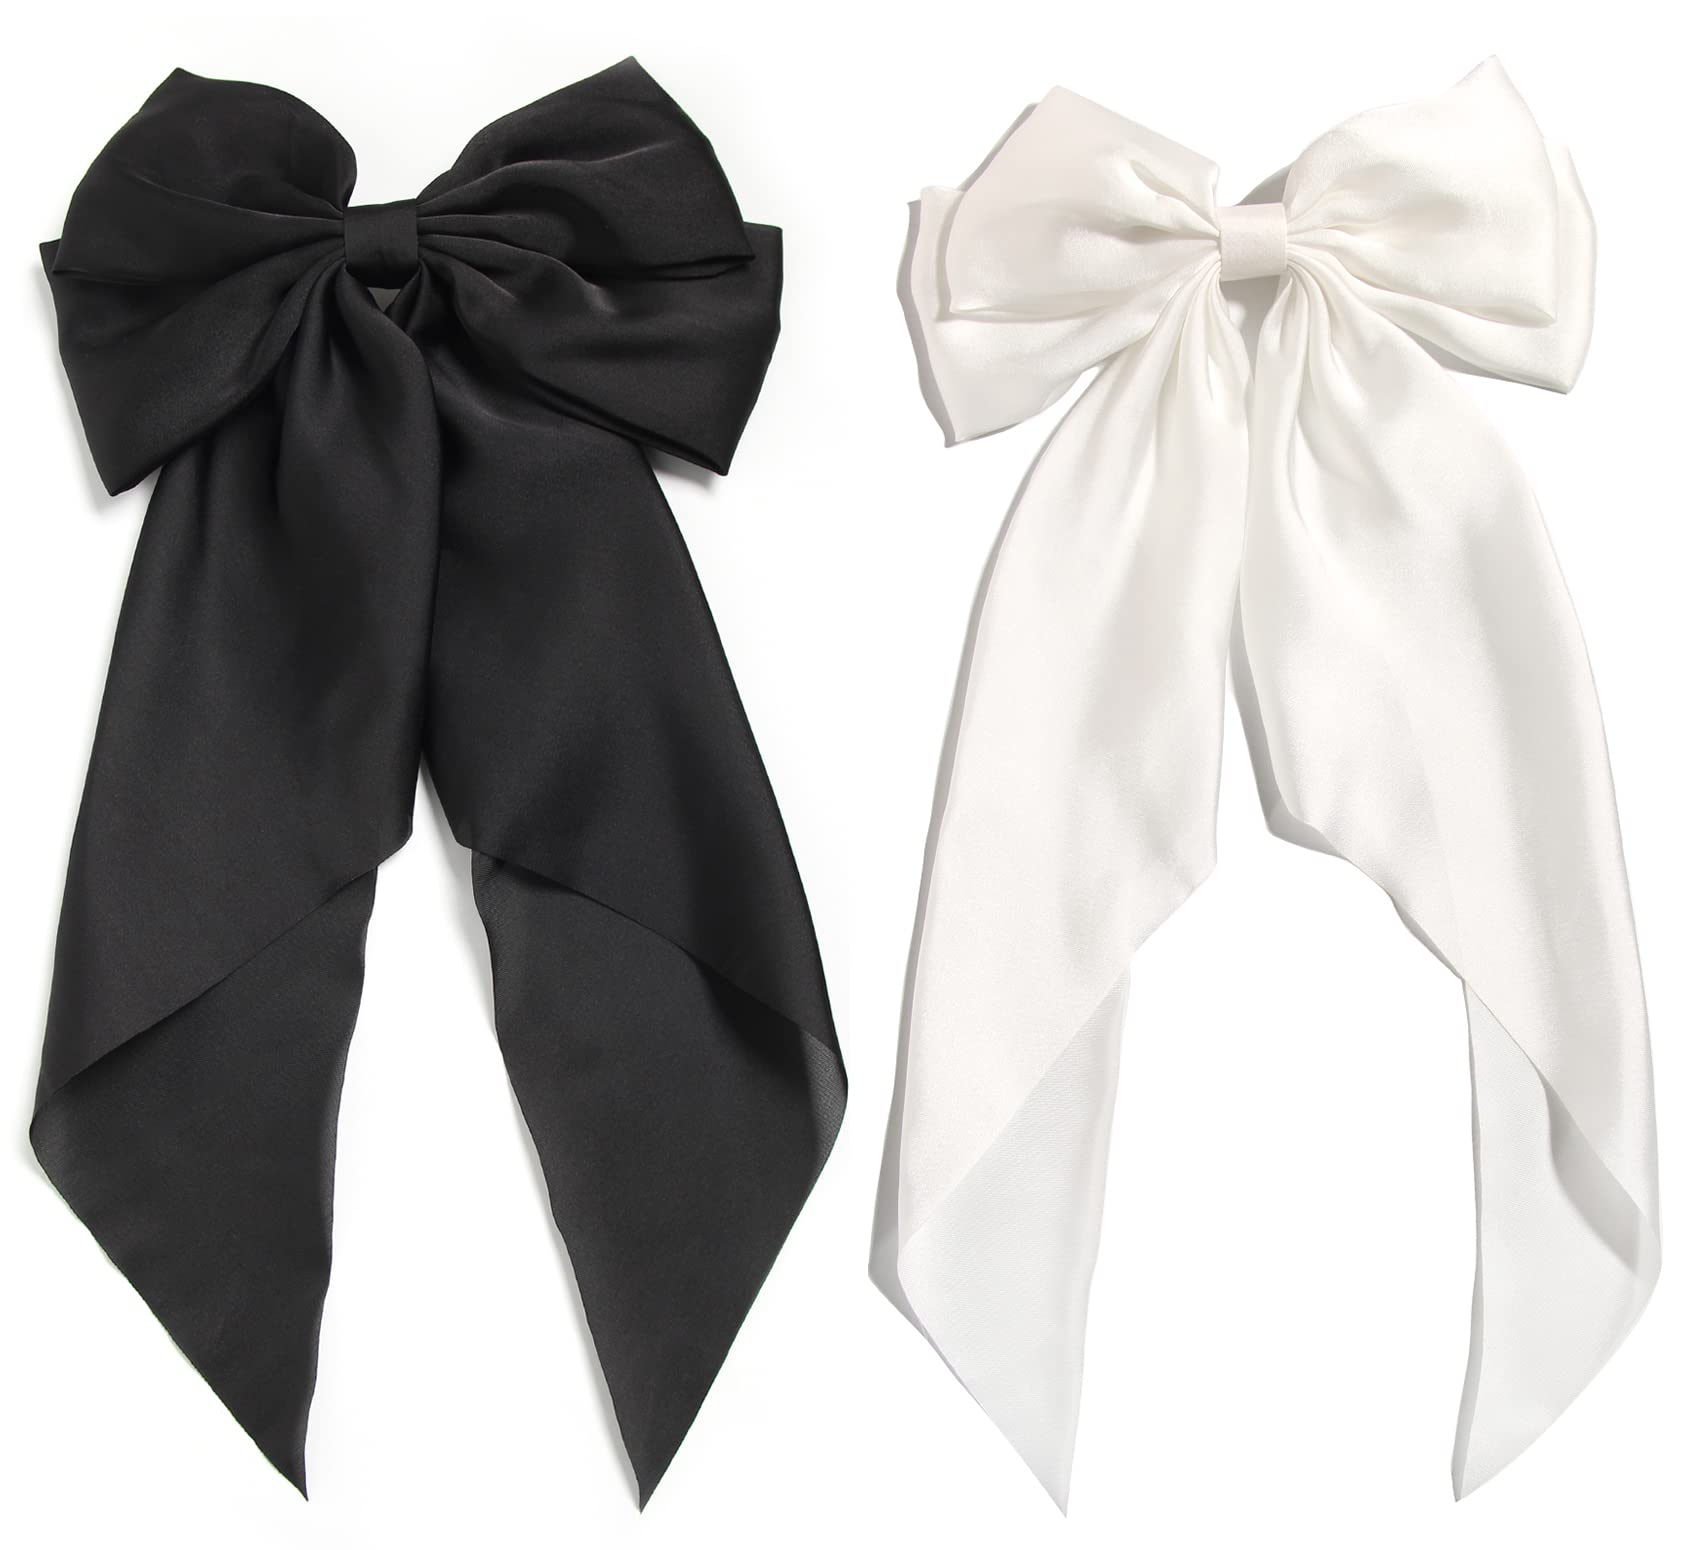 Jumbo Bow Clip with Tails (Black)  Ribbon hairstyle, Black hair bows, Bow  hairstyle